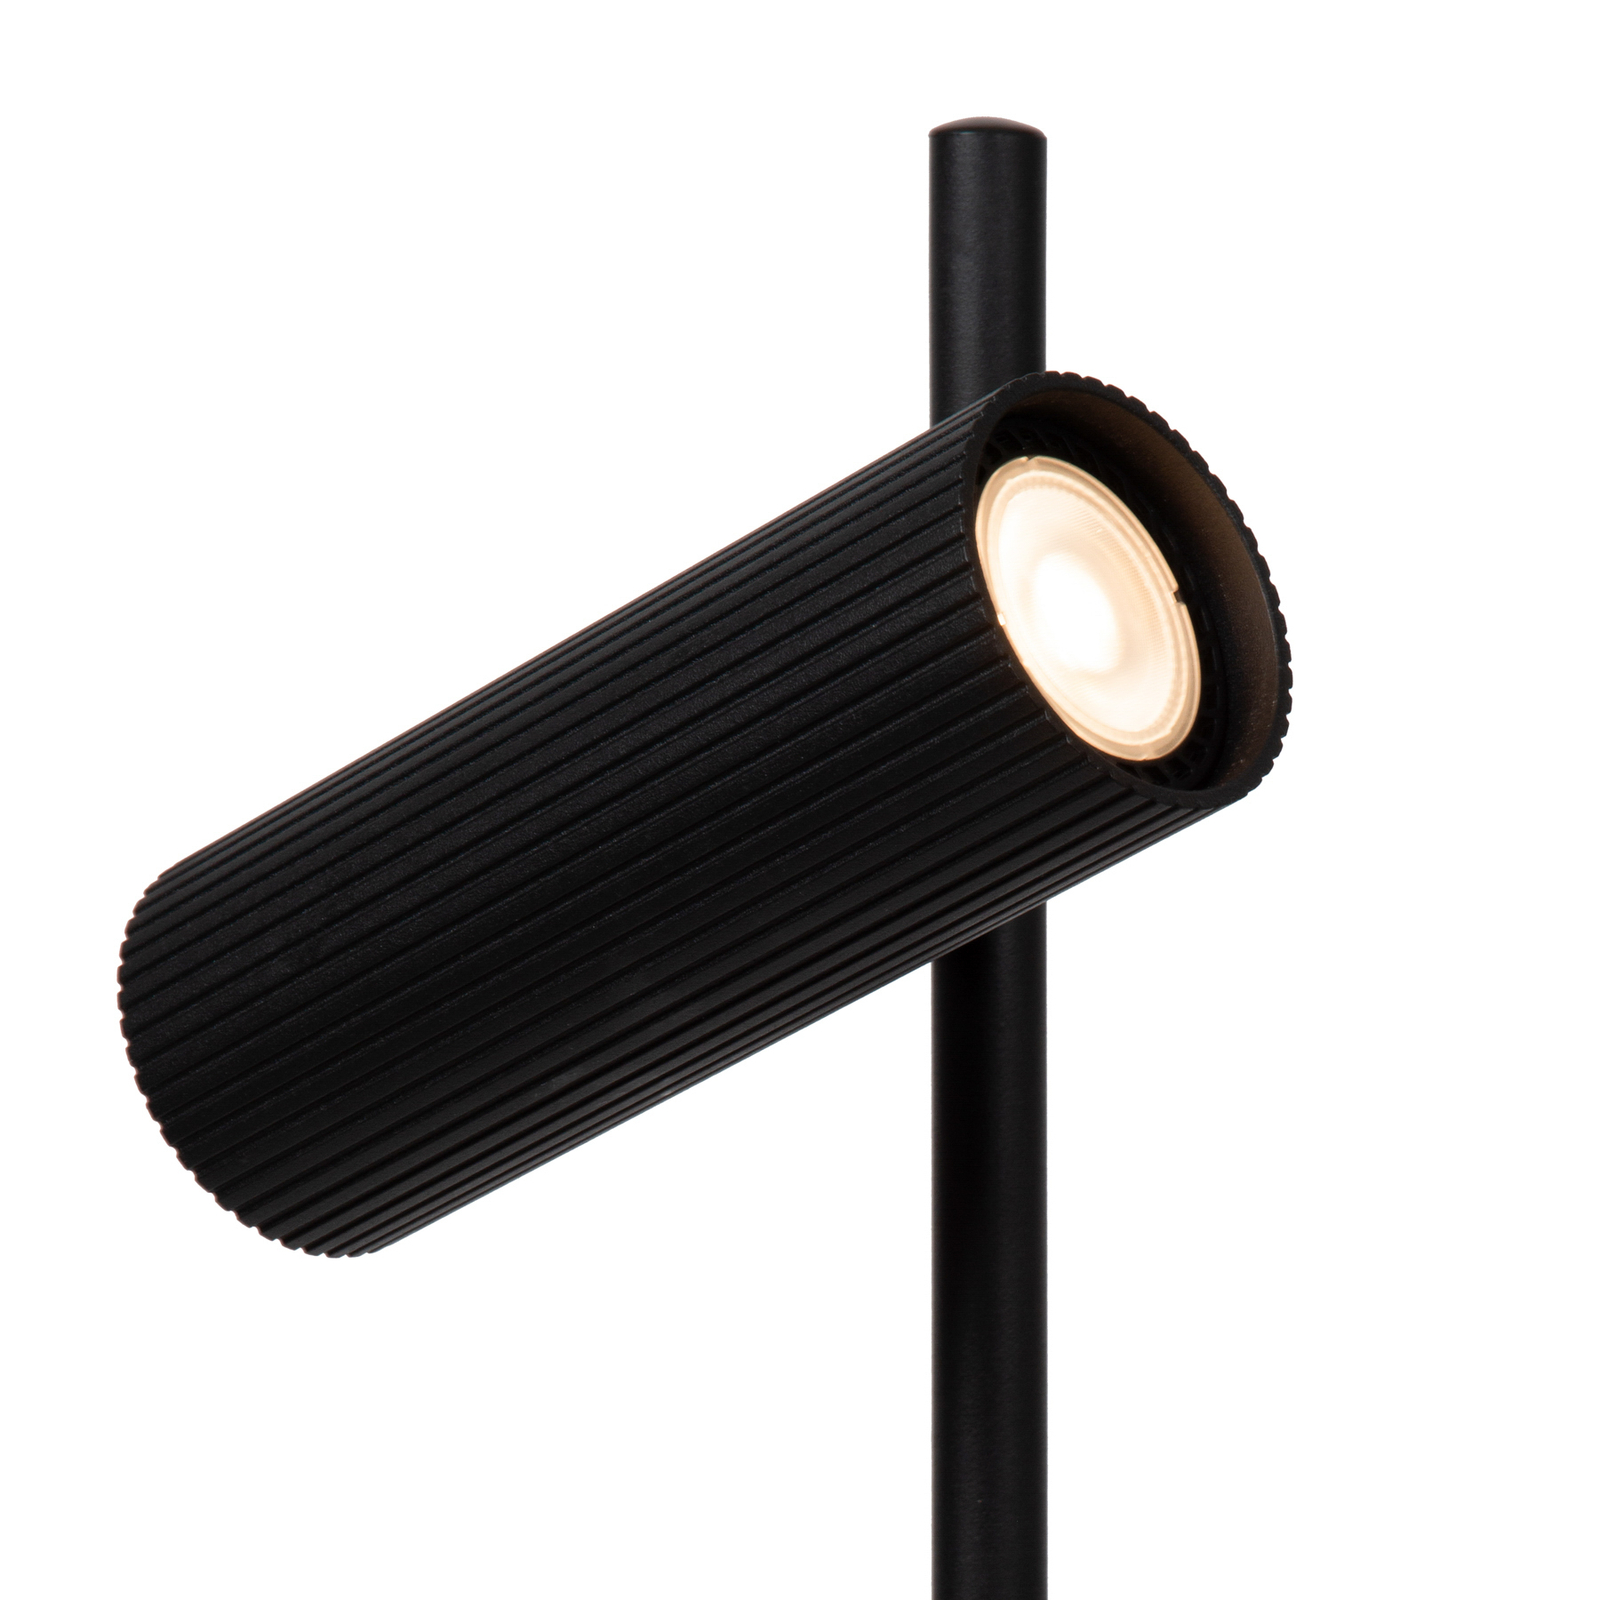 Clubs table lamp, rotatable and pivotable, black